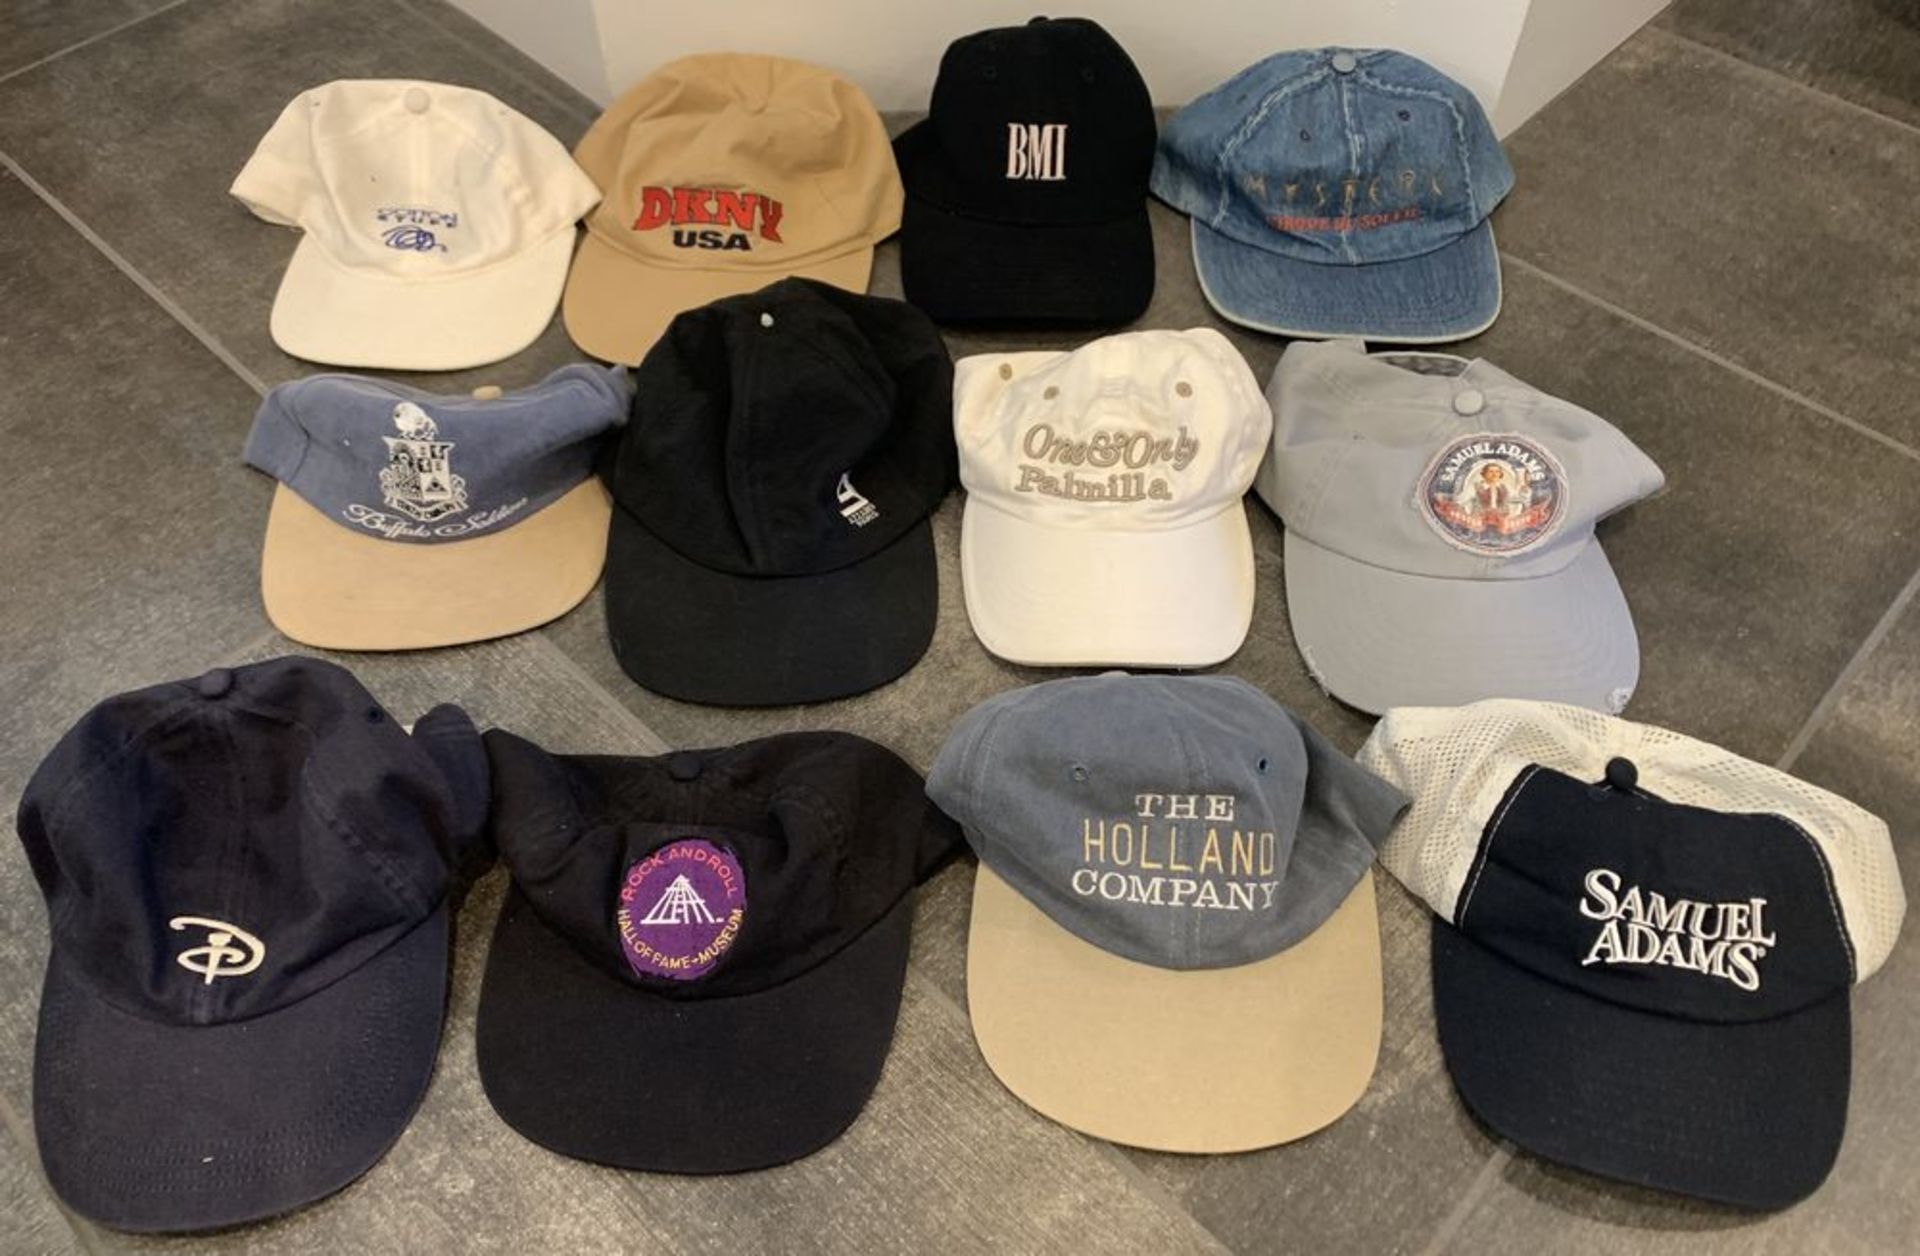 BOX OF 12 HATS MIXED STYLES AND SIZES - Image 2 of 2